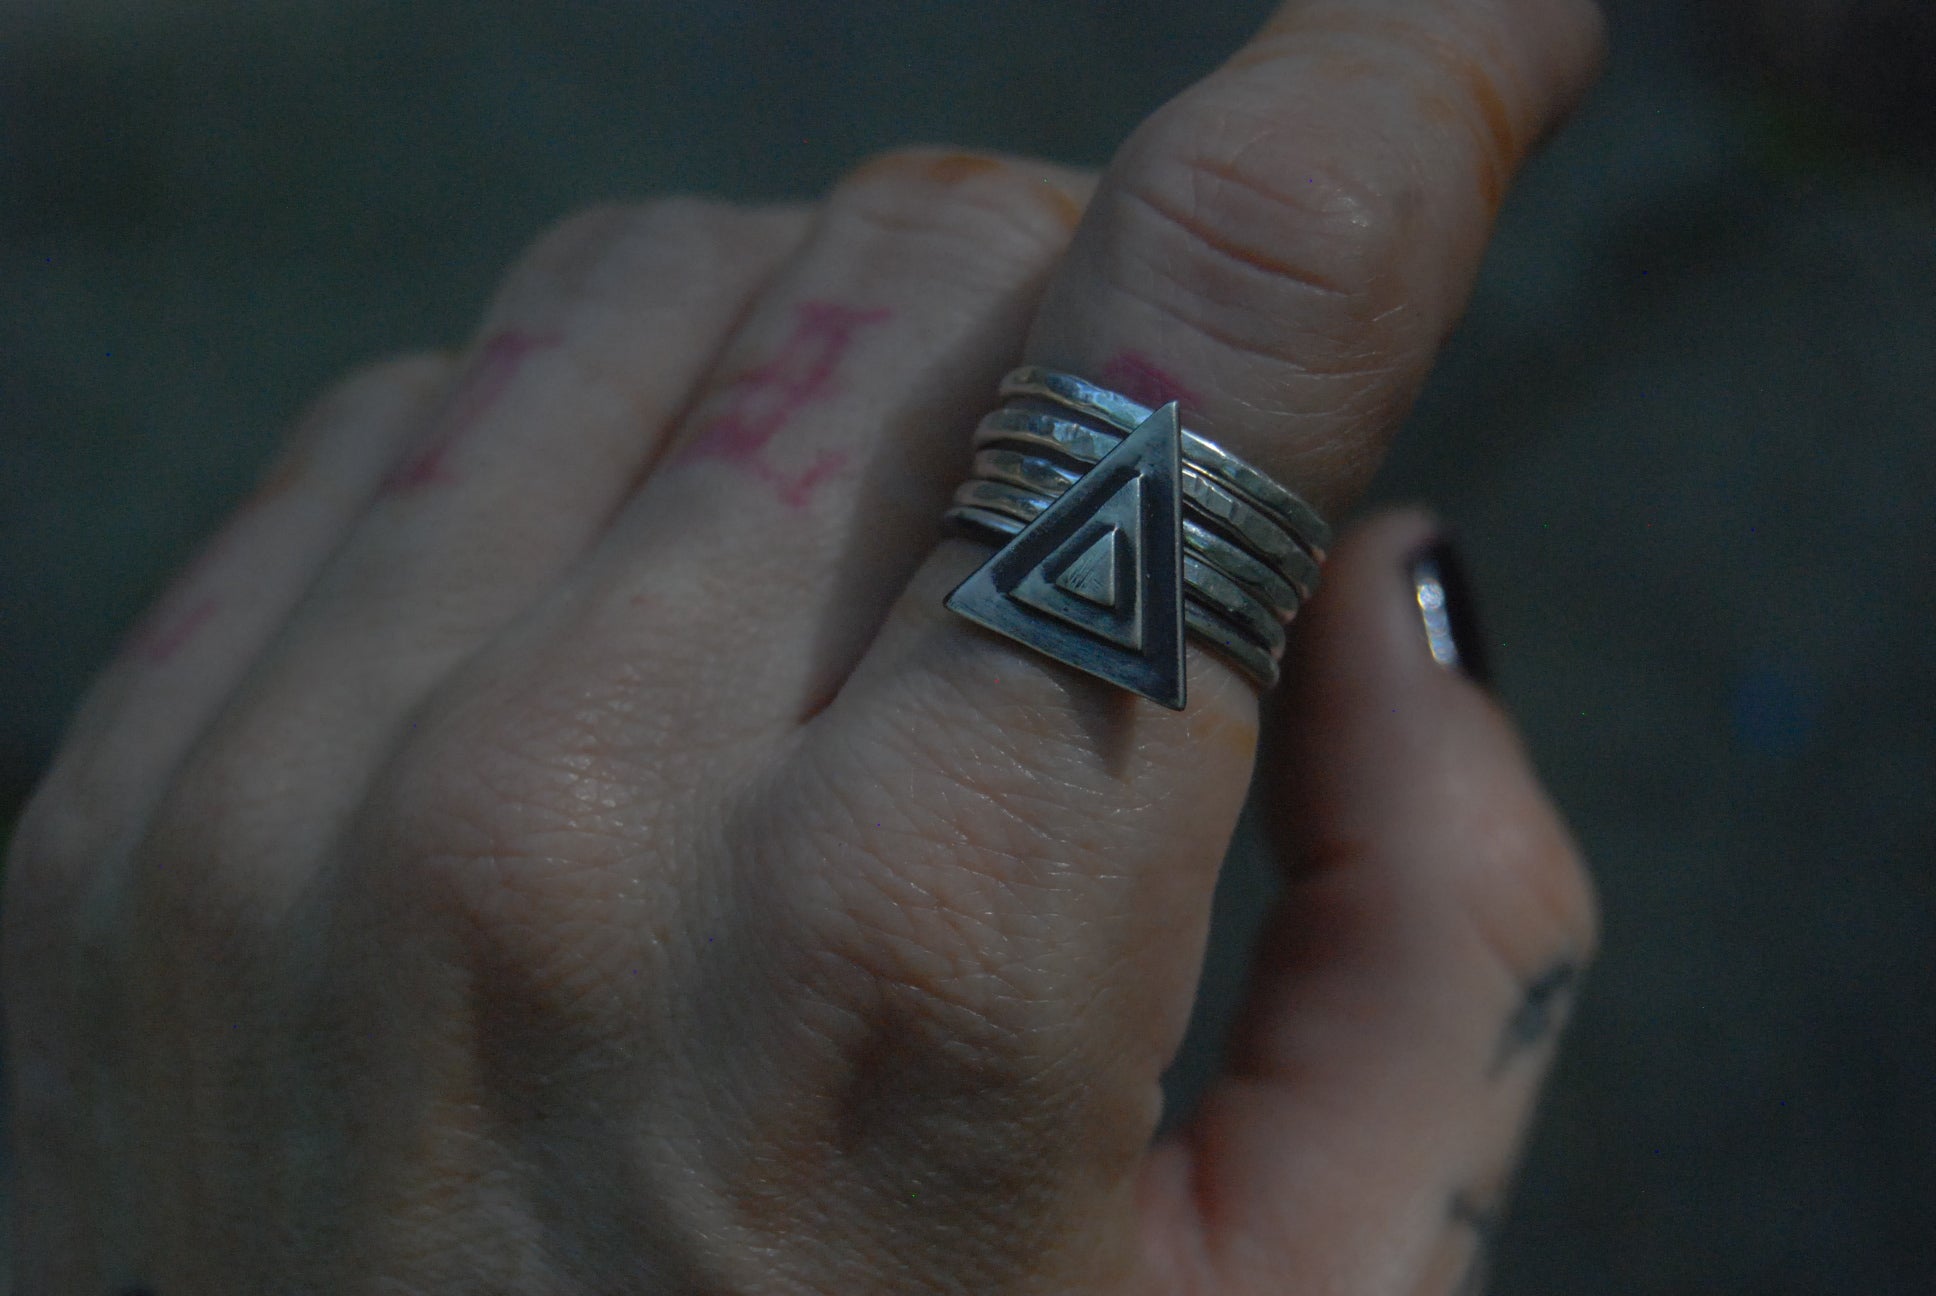 Triangle stack ring